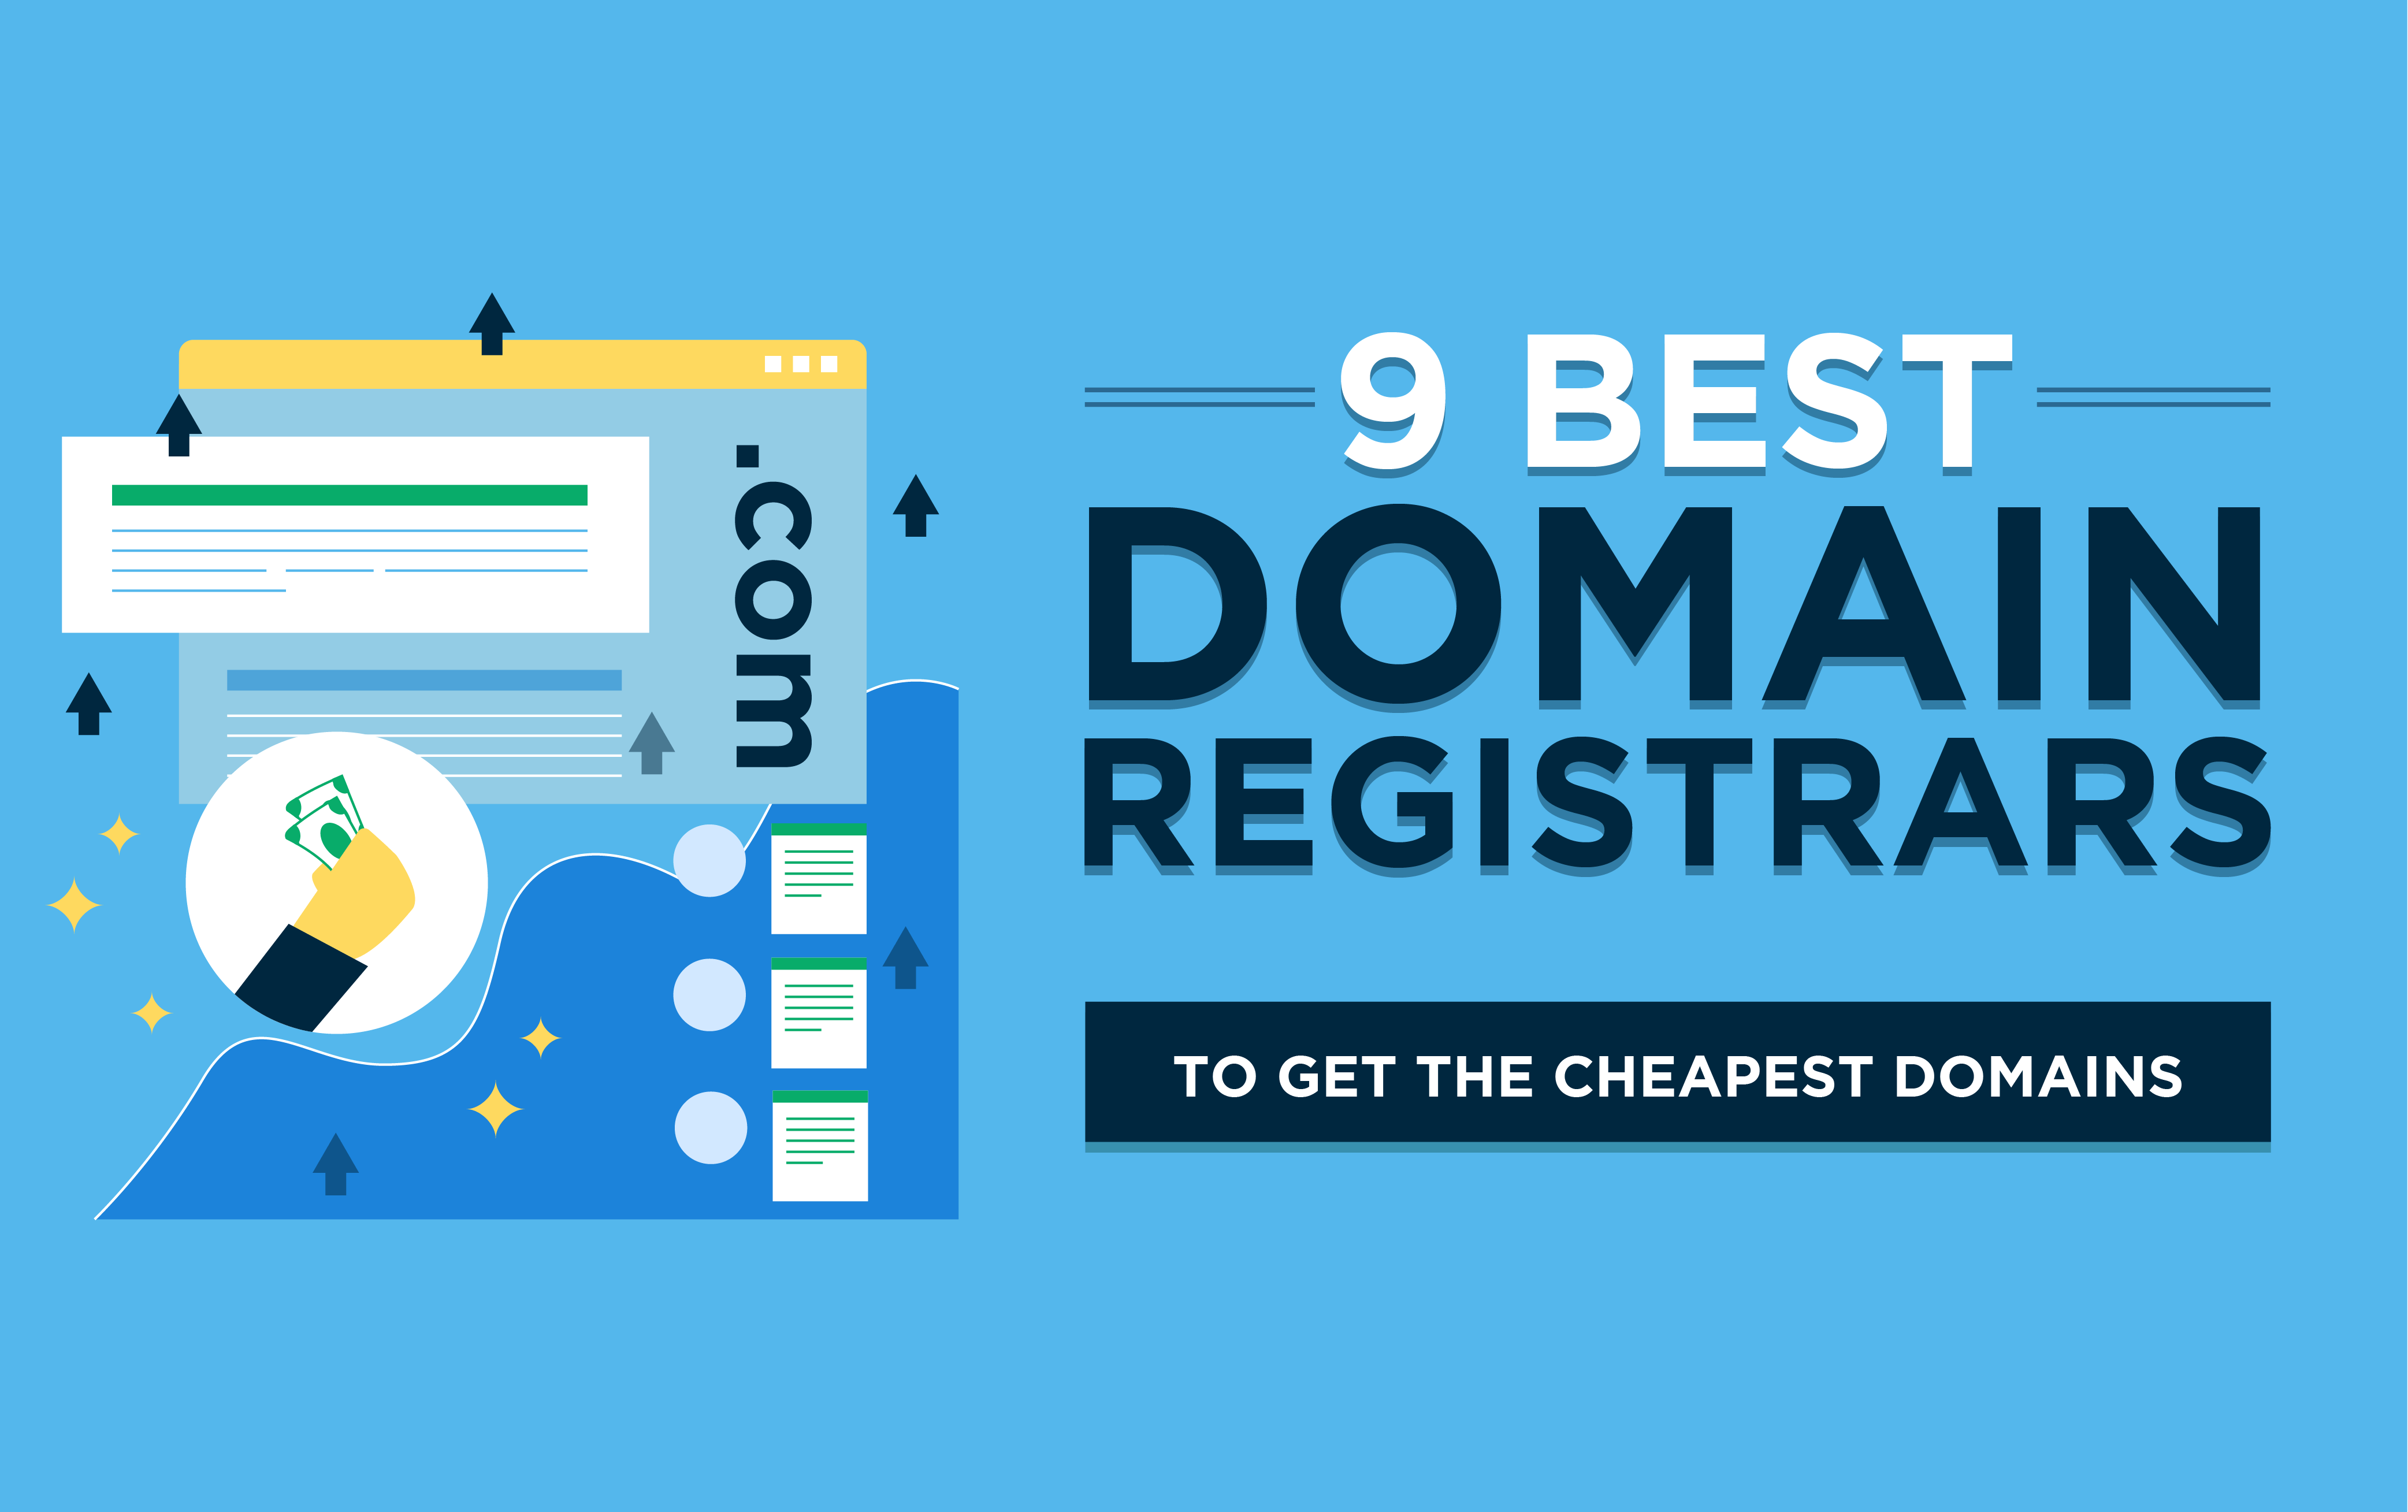 9 Best Domain Registrars to Register Your Domain Name for Cheap